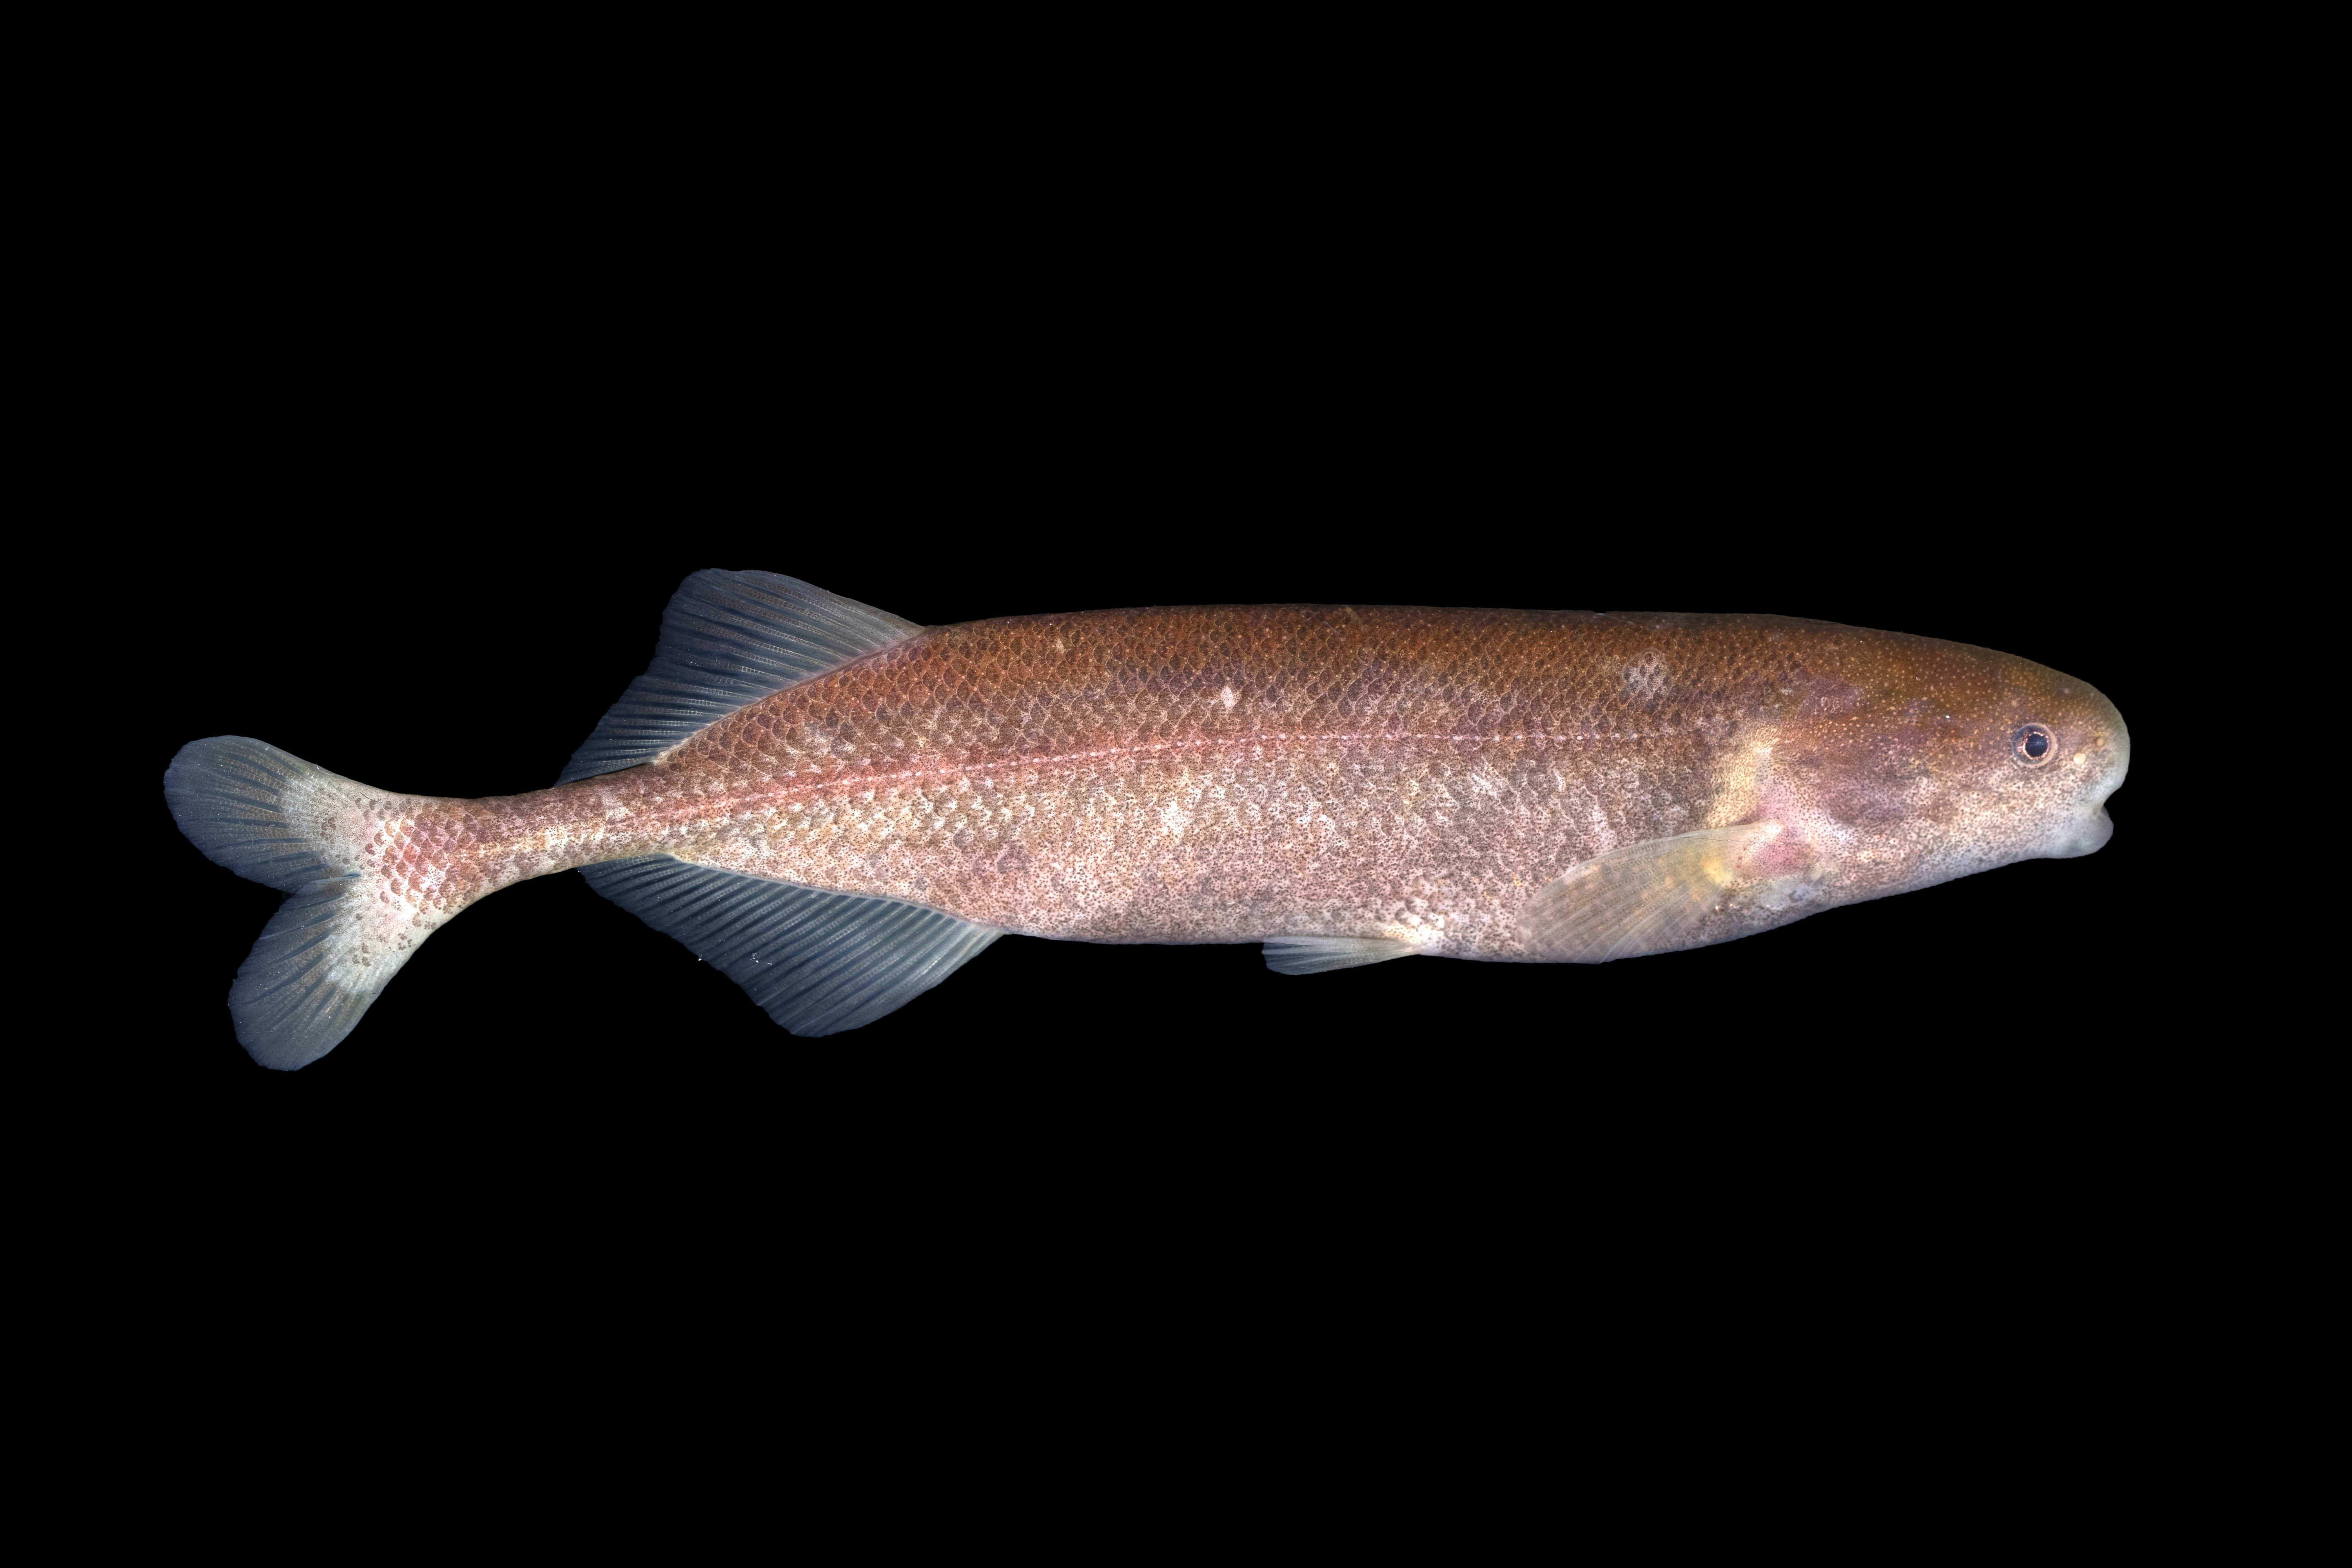 https://natsci.msu.edu/_assets/images/news/2023/2023-04-shocking-implications-of-electric-fishes-tailless-%20sperm.weakley%20fish.jpg